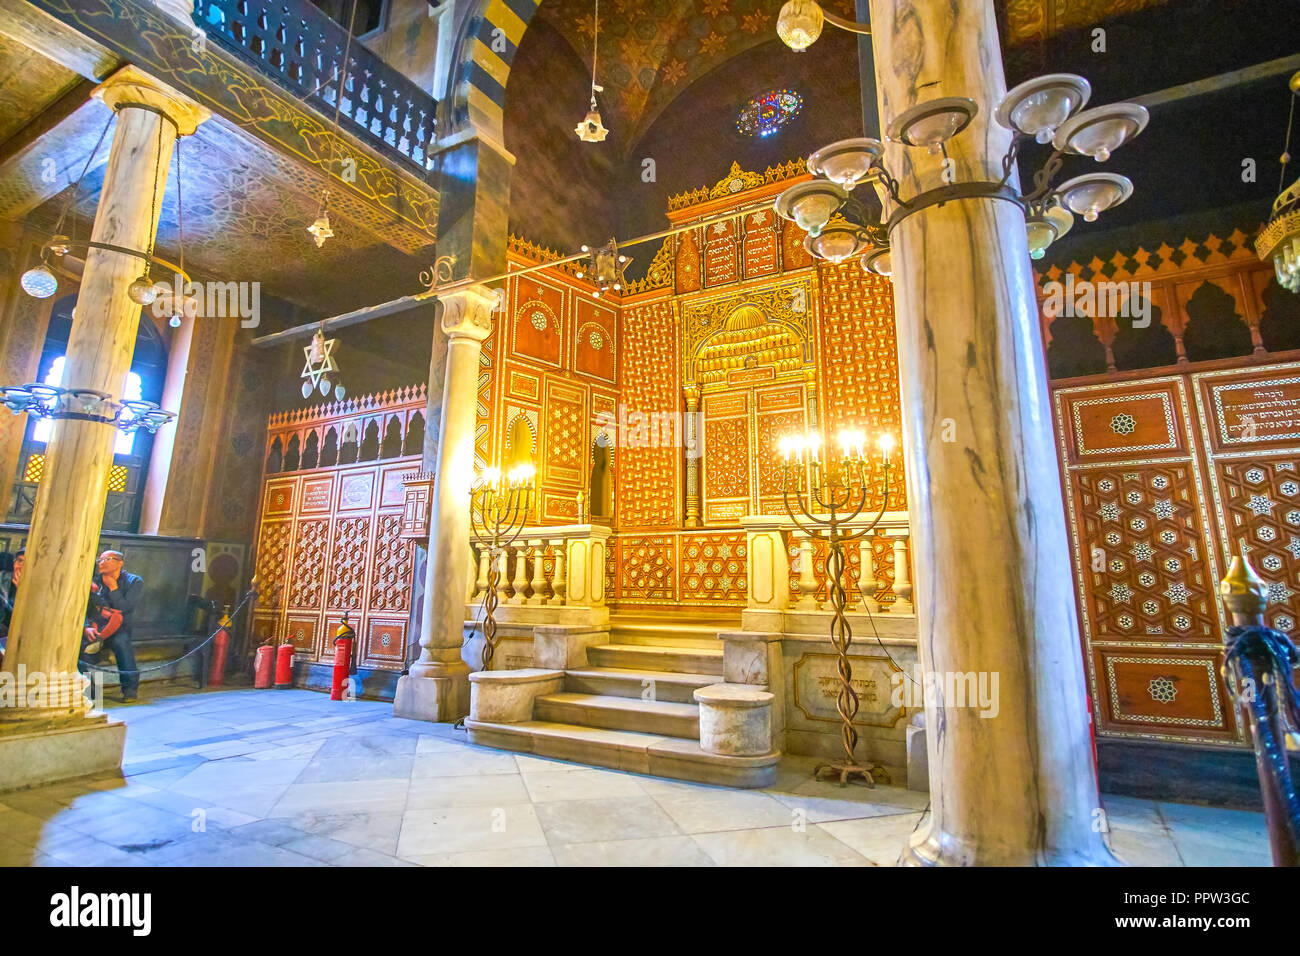 CAIRO, EGYPT - DECEMBER 23, 2017: The beautiful carved Ark is the closet where the Torahs are stored, and it's the main element of Ben Ezra Synagogue, Stock Photo